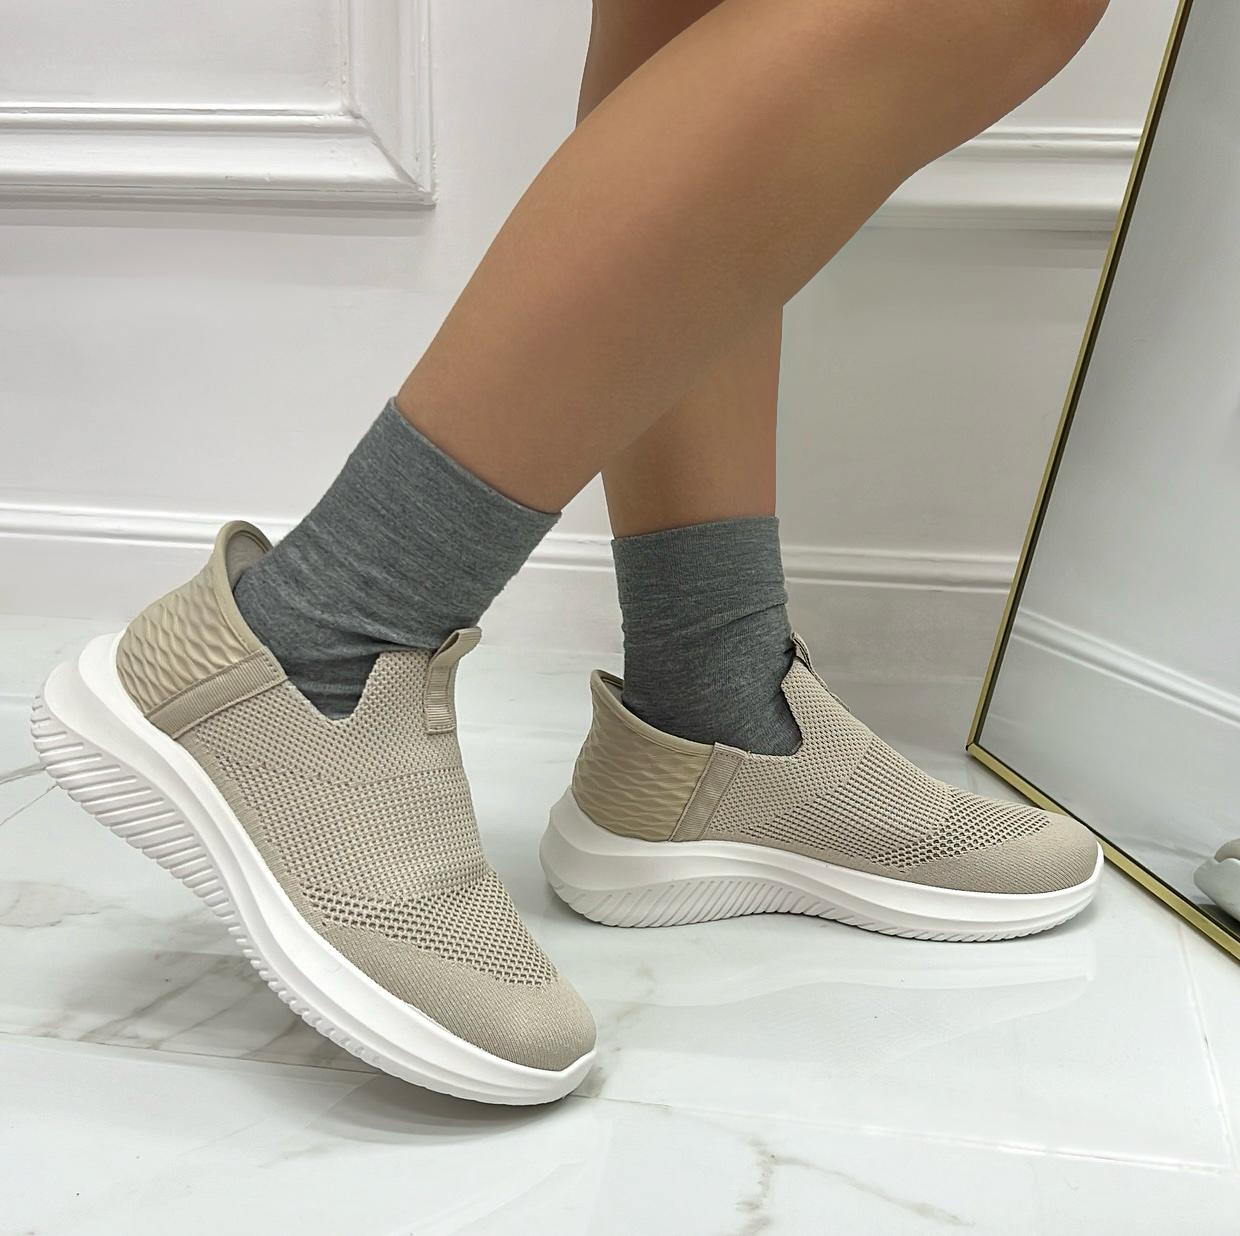 Madison - Sneakers Slip On Donna Scarpe Casual Comode Beige